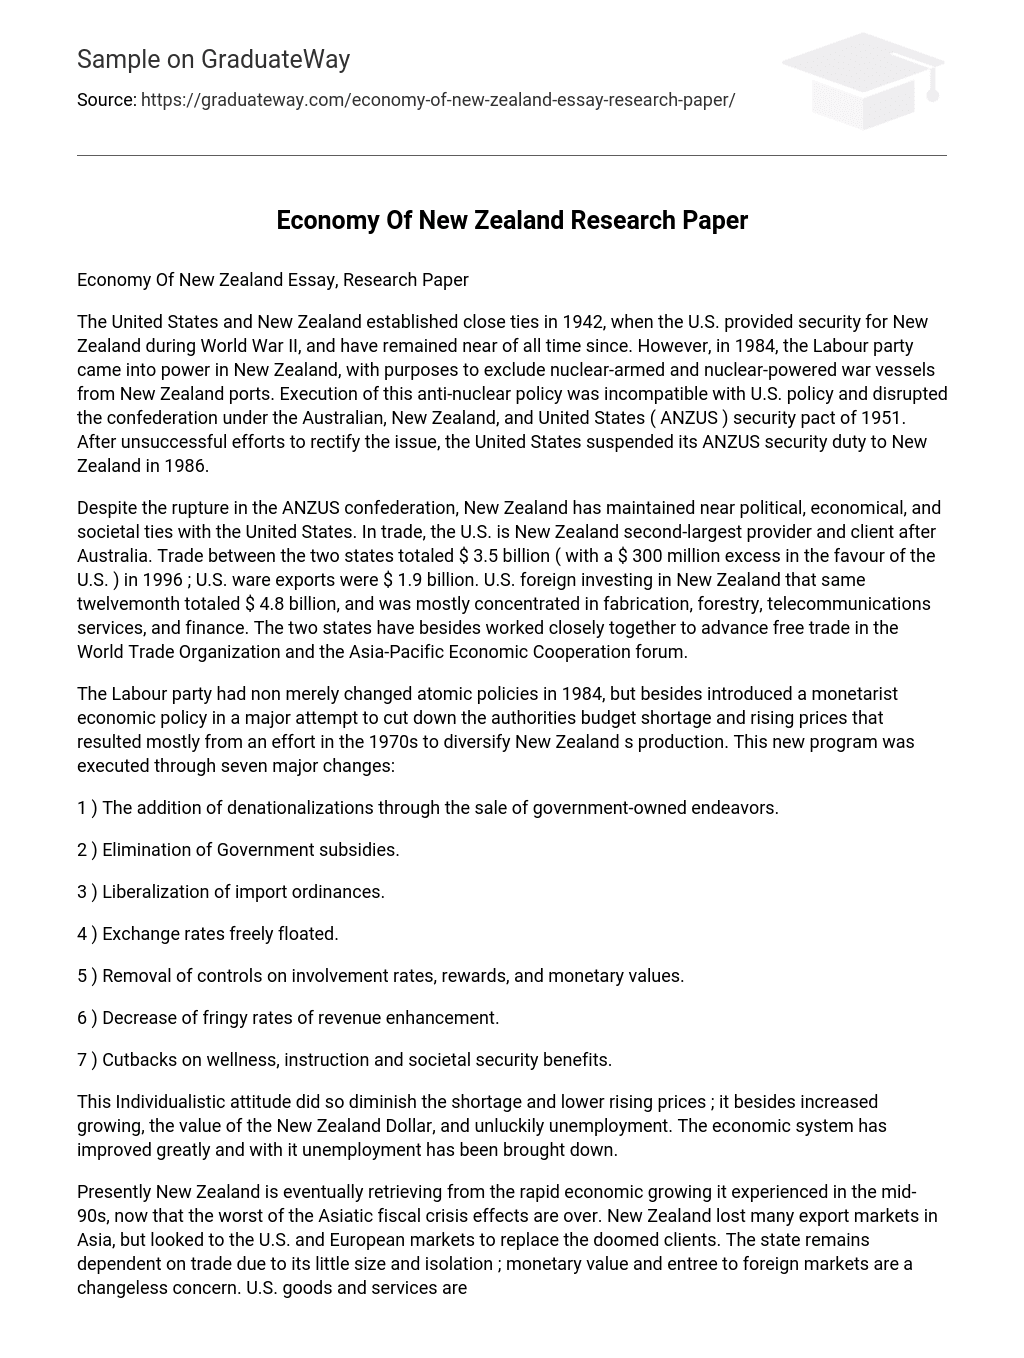 Economy Of New Zealand Research Paper